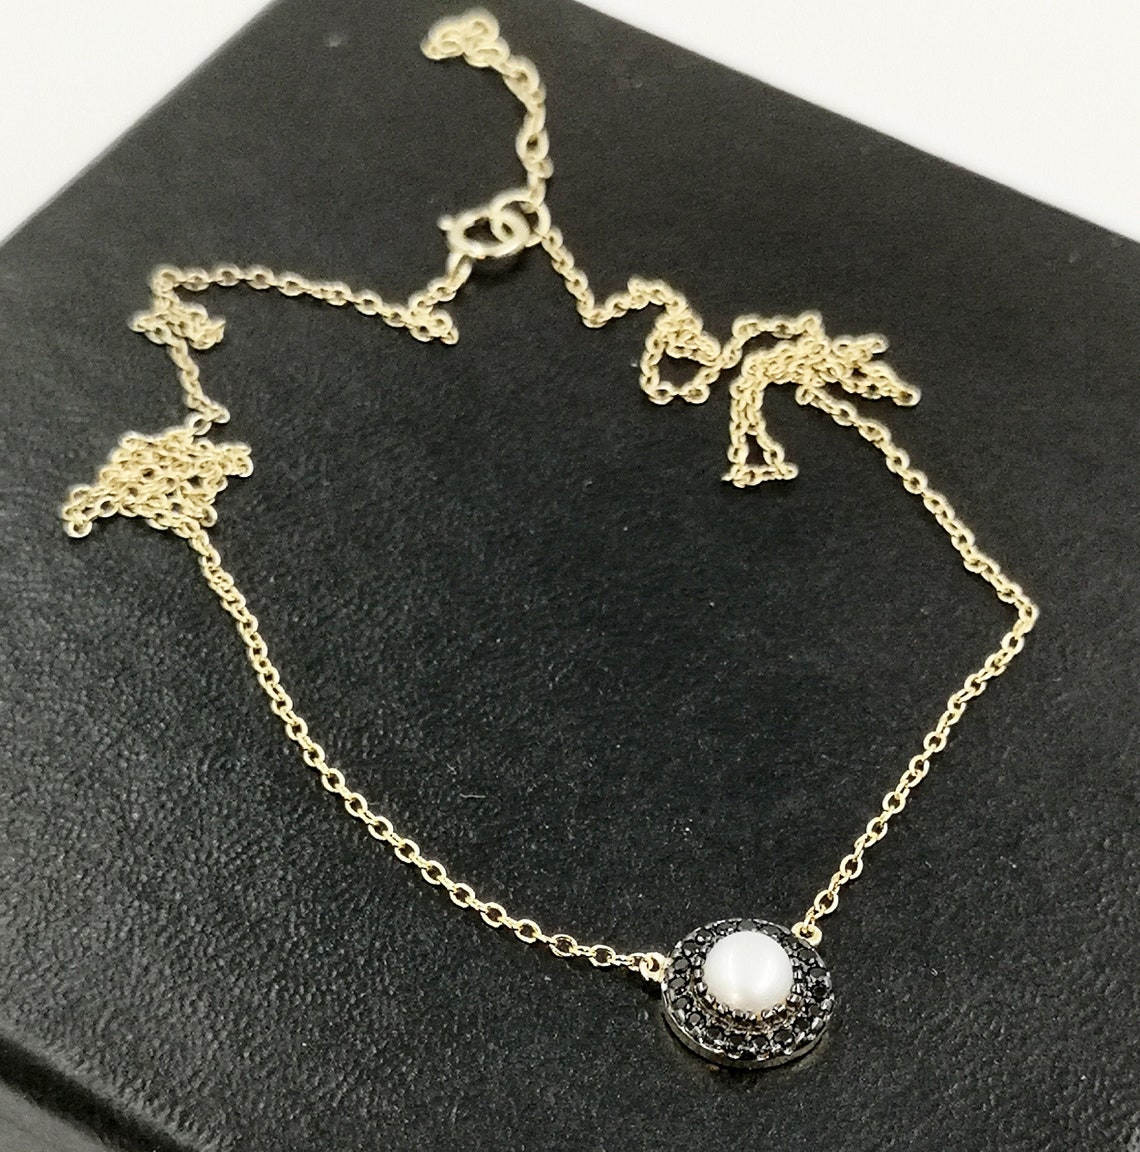 White Pearl and Black Cubic Zirconia Pendant Necklace - Etsy